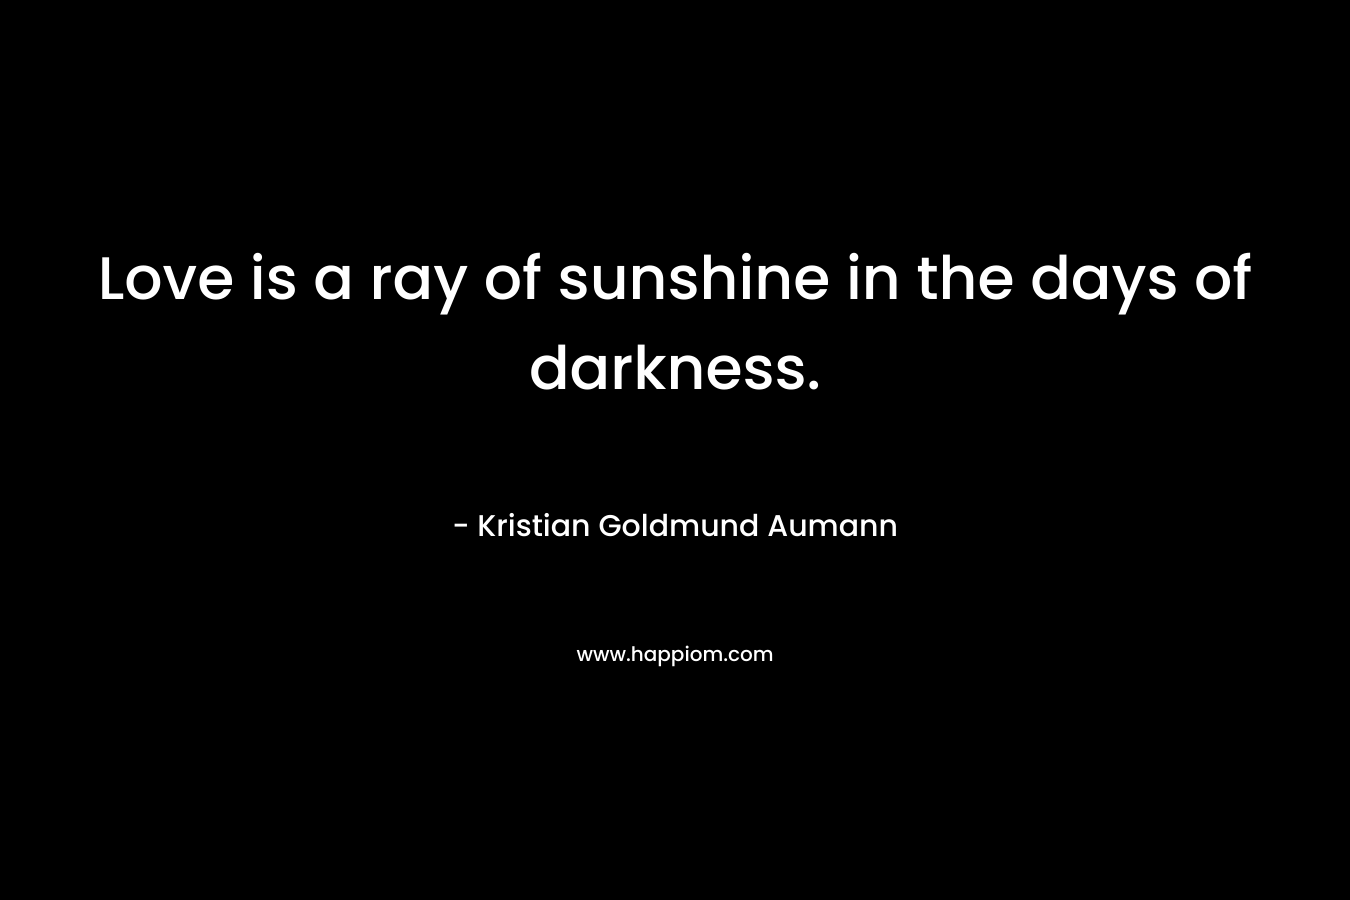 Love is a ray of sunshine in the days of darkness. – Kristian Goldmund Aumann